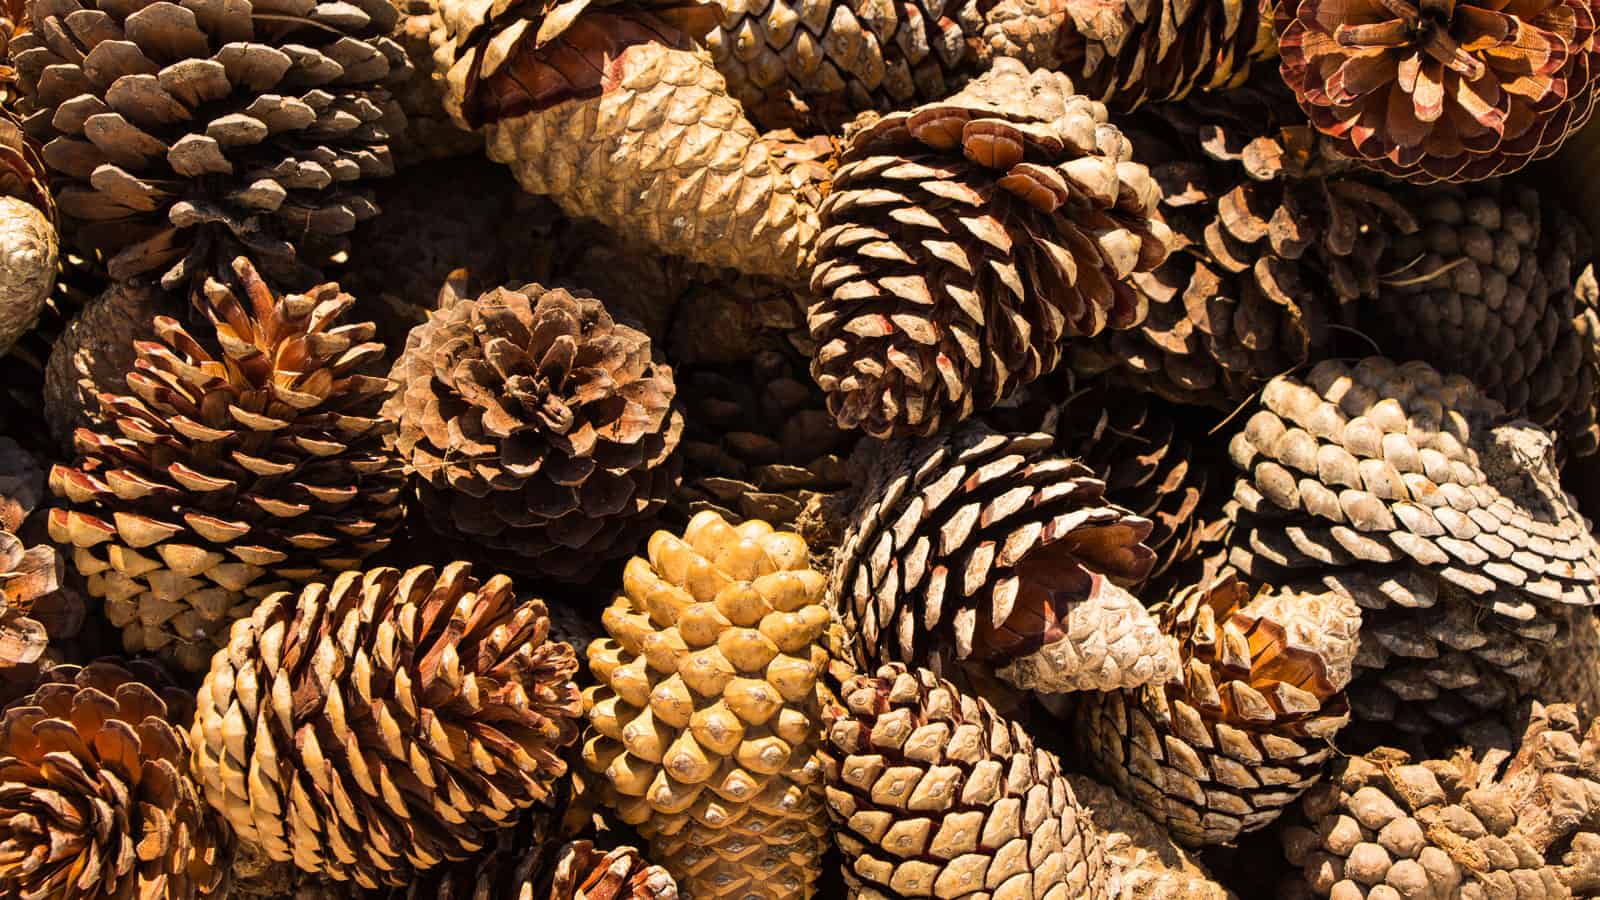 A small pile of pine cones, How to Make Your Own Fire Starters - 1600x900